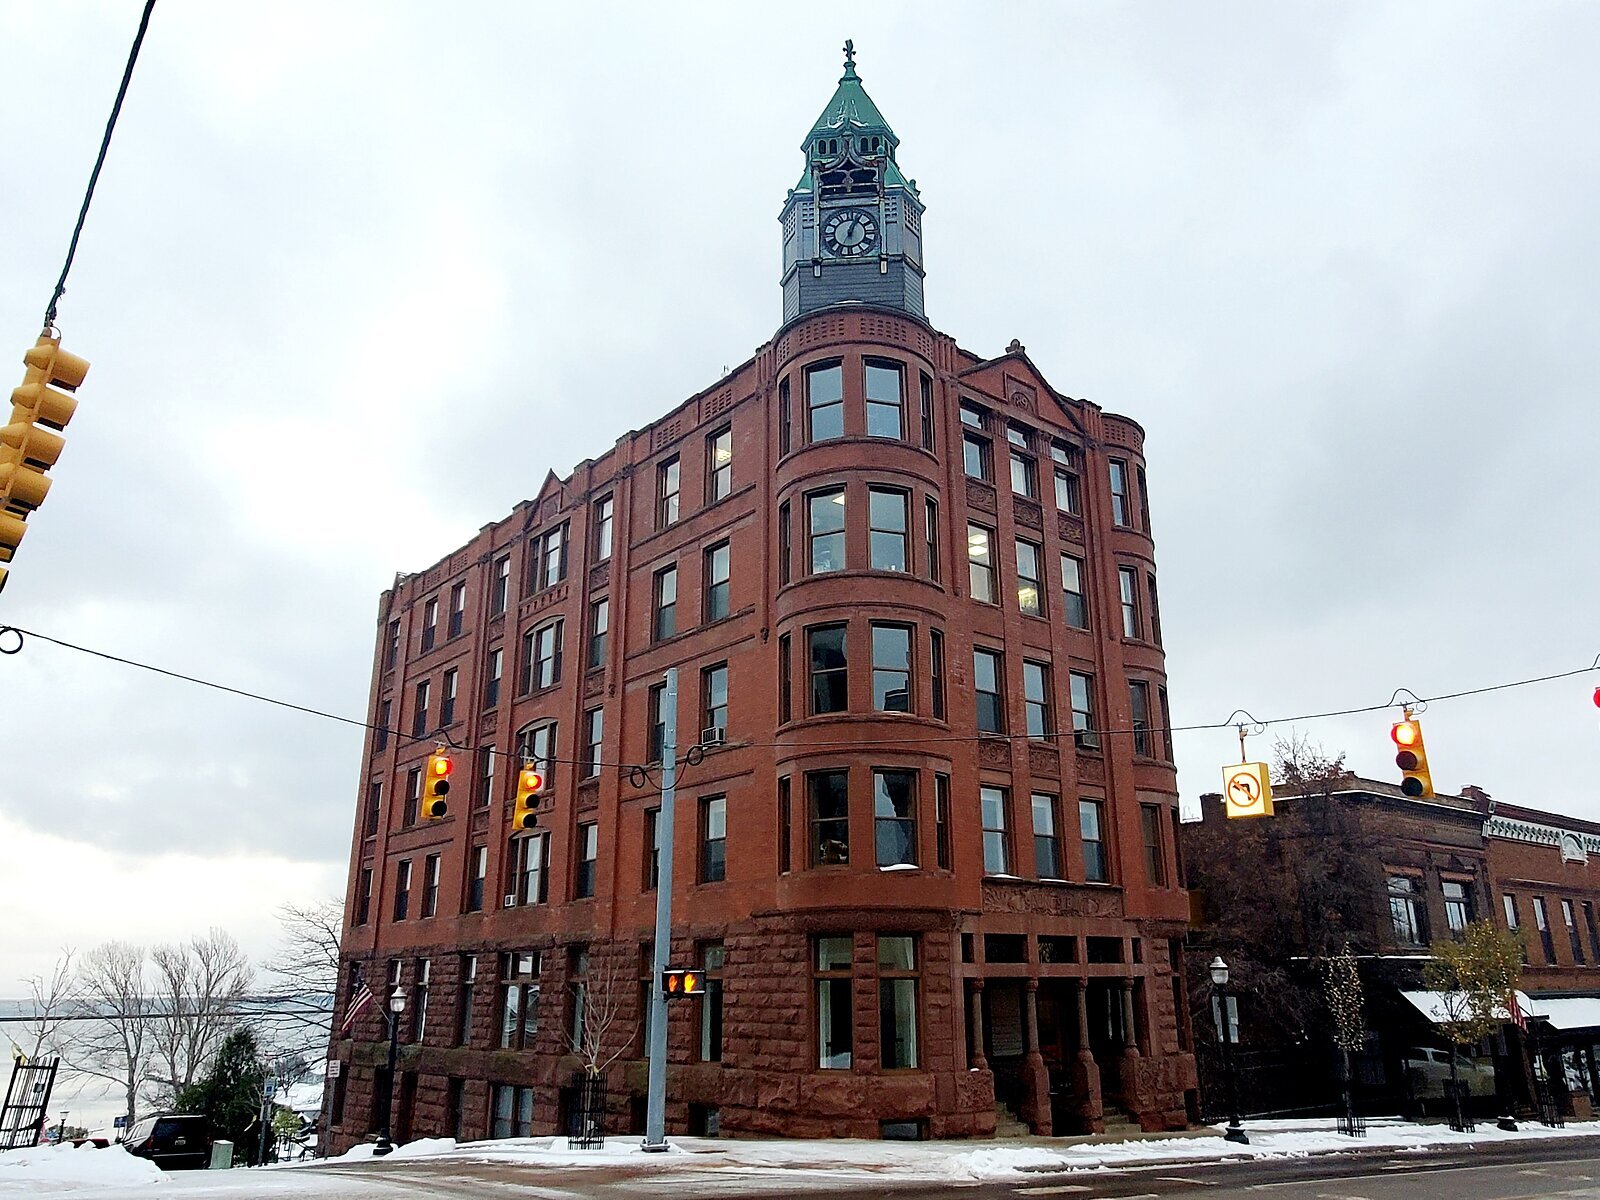 The Savings Bank Building in Marquette is the site of a major development project in the downtown area.